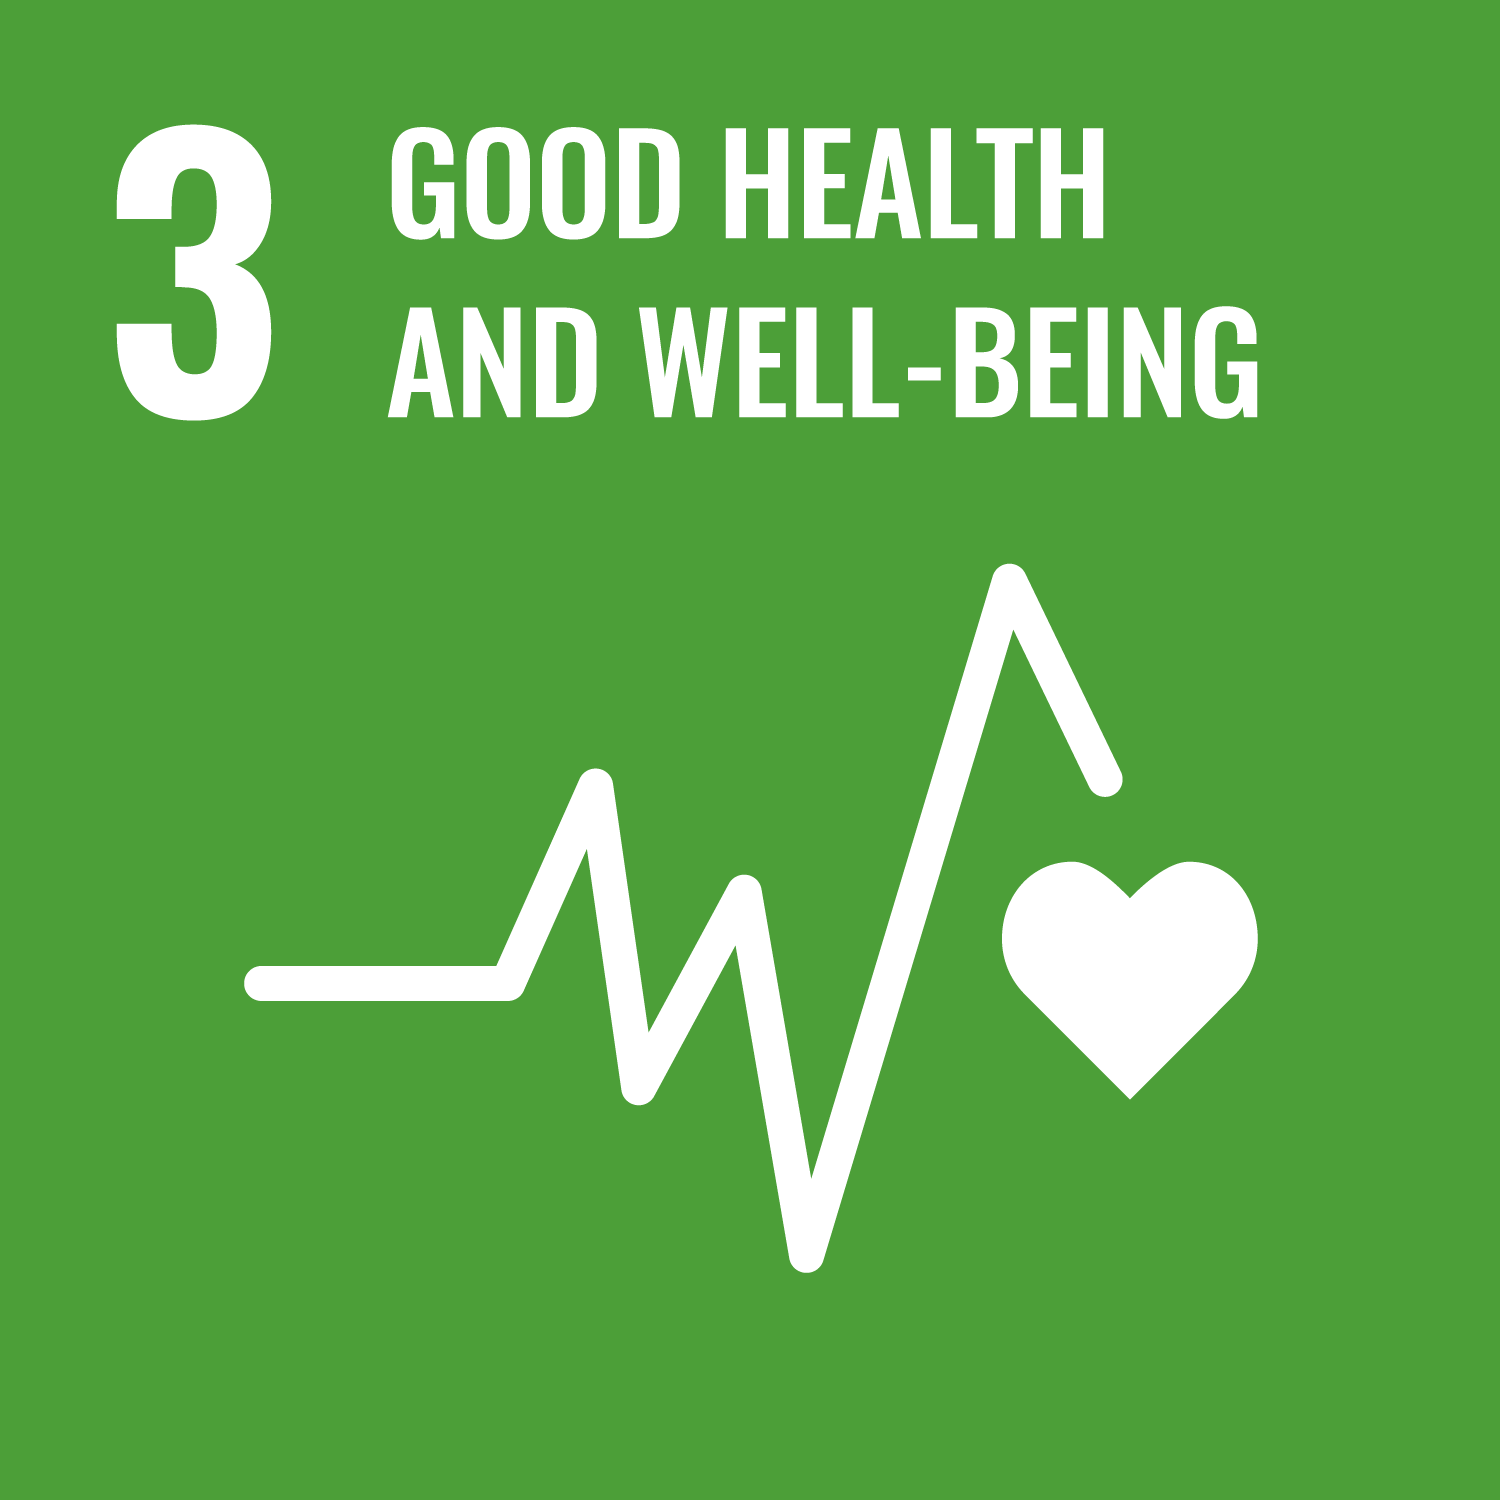 SDG 3 Good Health and Well-Beingr